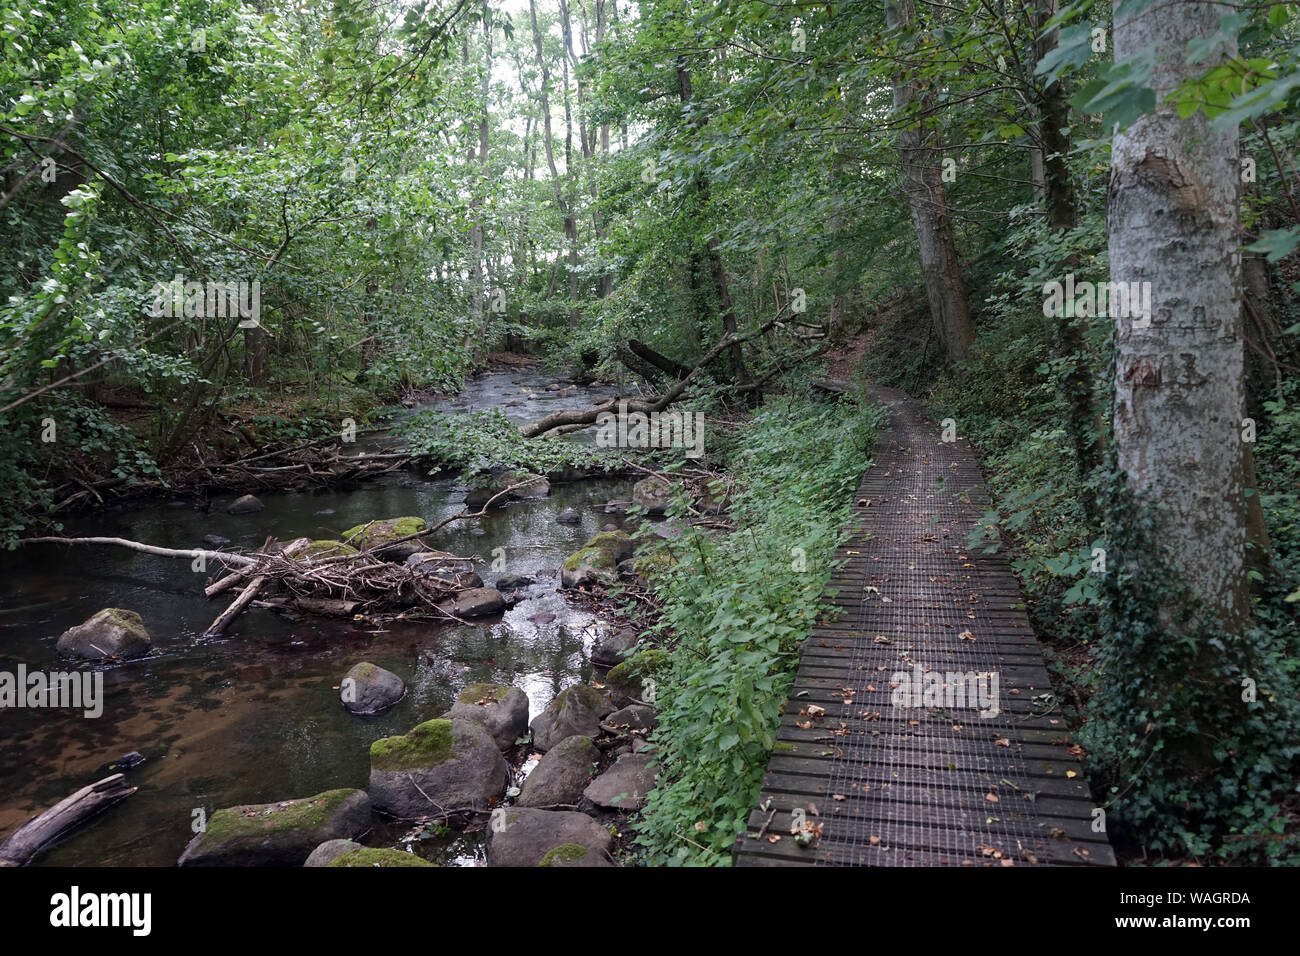 River, walkway and forest in Denmark Stock Photo